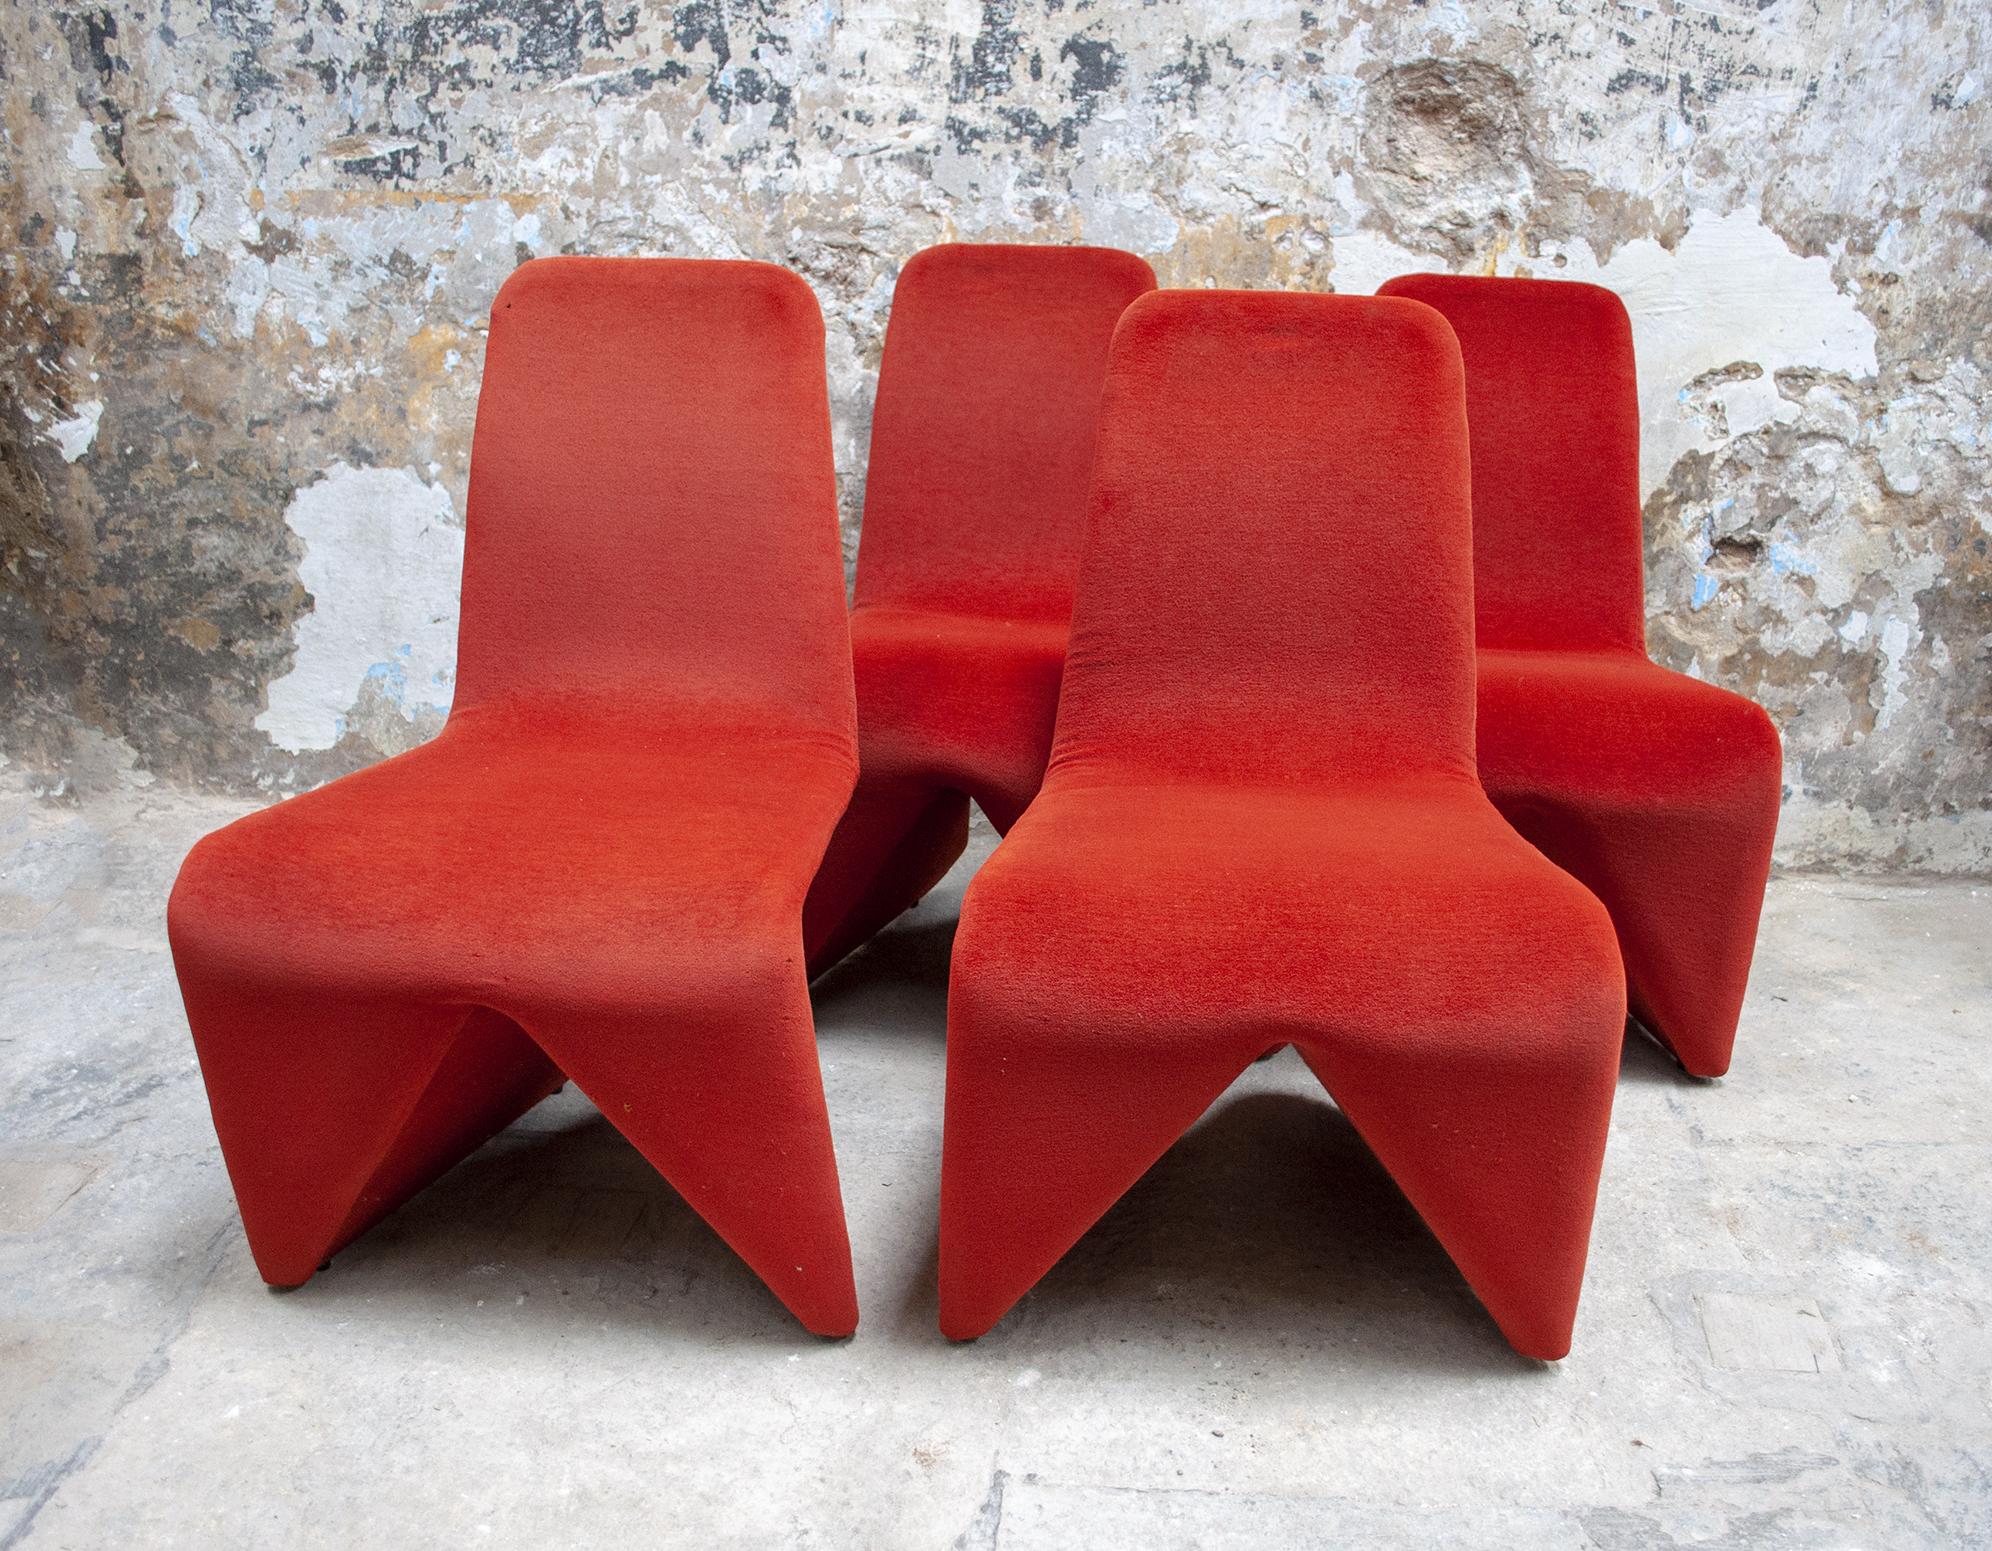 Four chairs with tubular iron lined with velvet and sponge.
Italian production,
1970s.